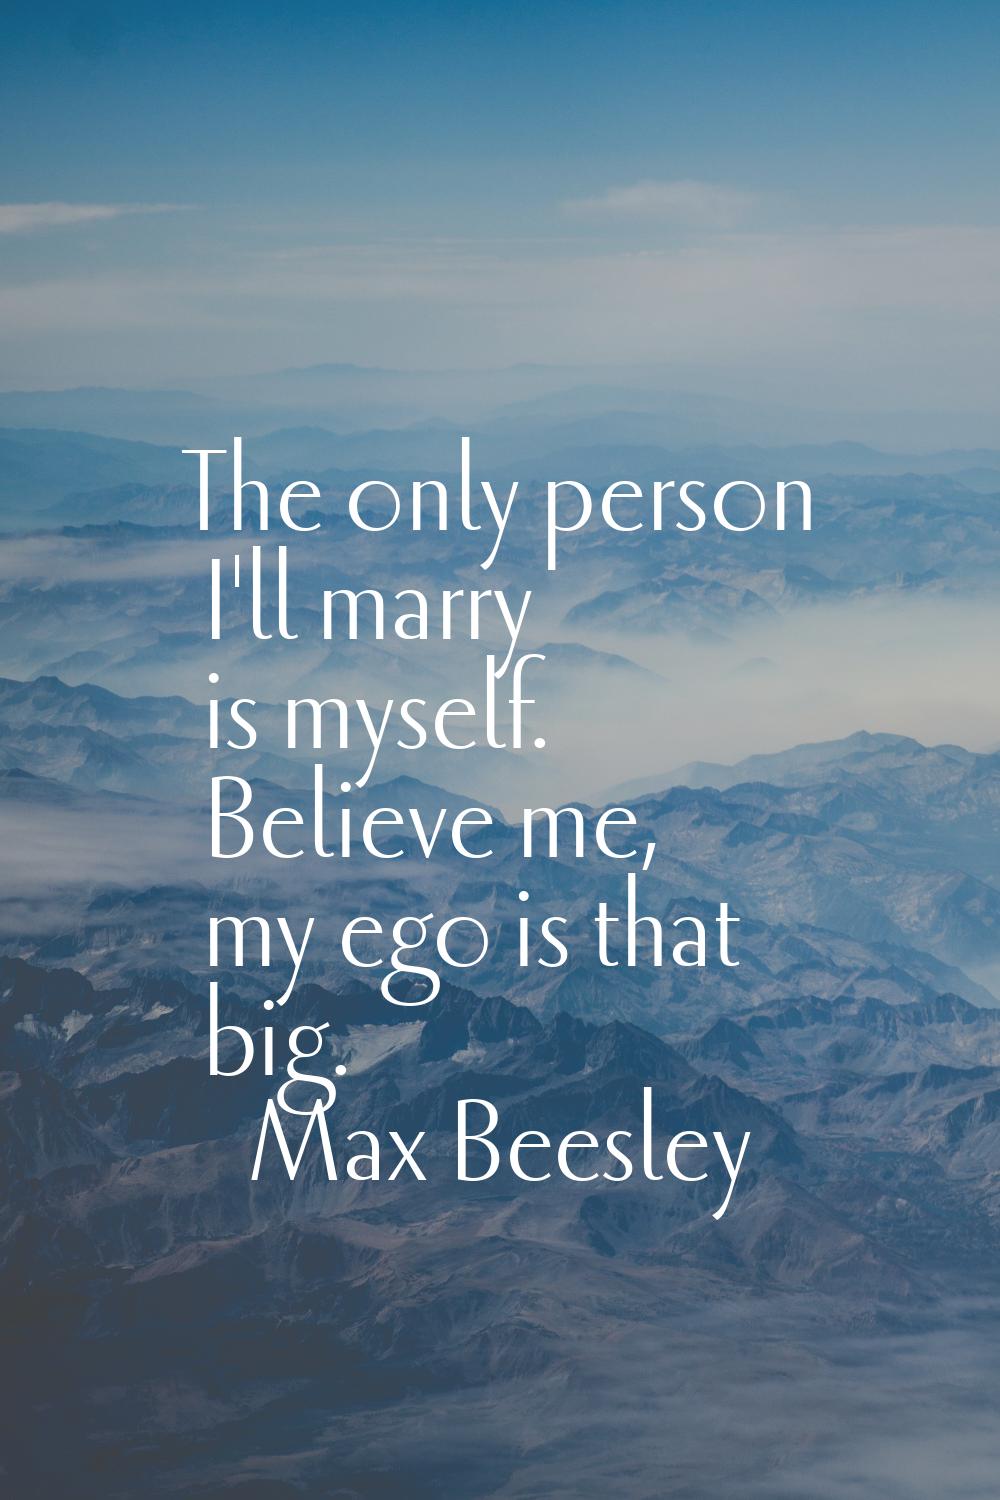 The only person I'll marry is myself. Believe me, my ego is that big.